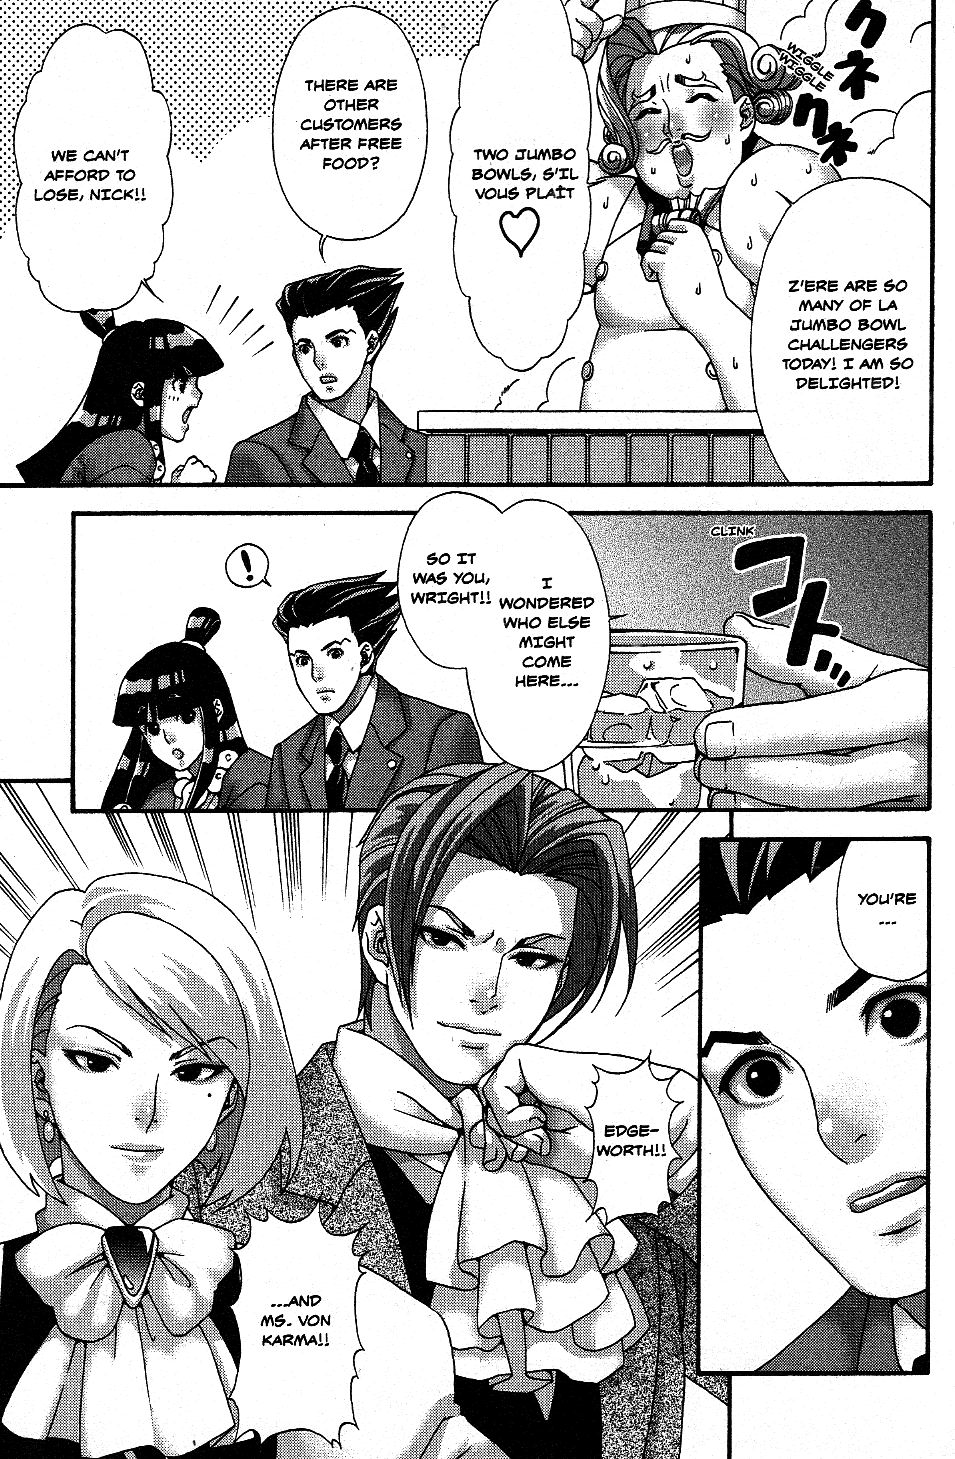 Phoenix Wright: Ace Attorney - Official Casebook Vol.1 Chapter 13: Turnabout? Food Fight - By Yorozu - Picture 3